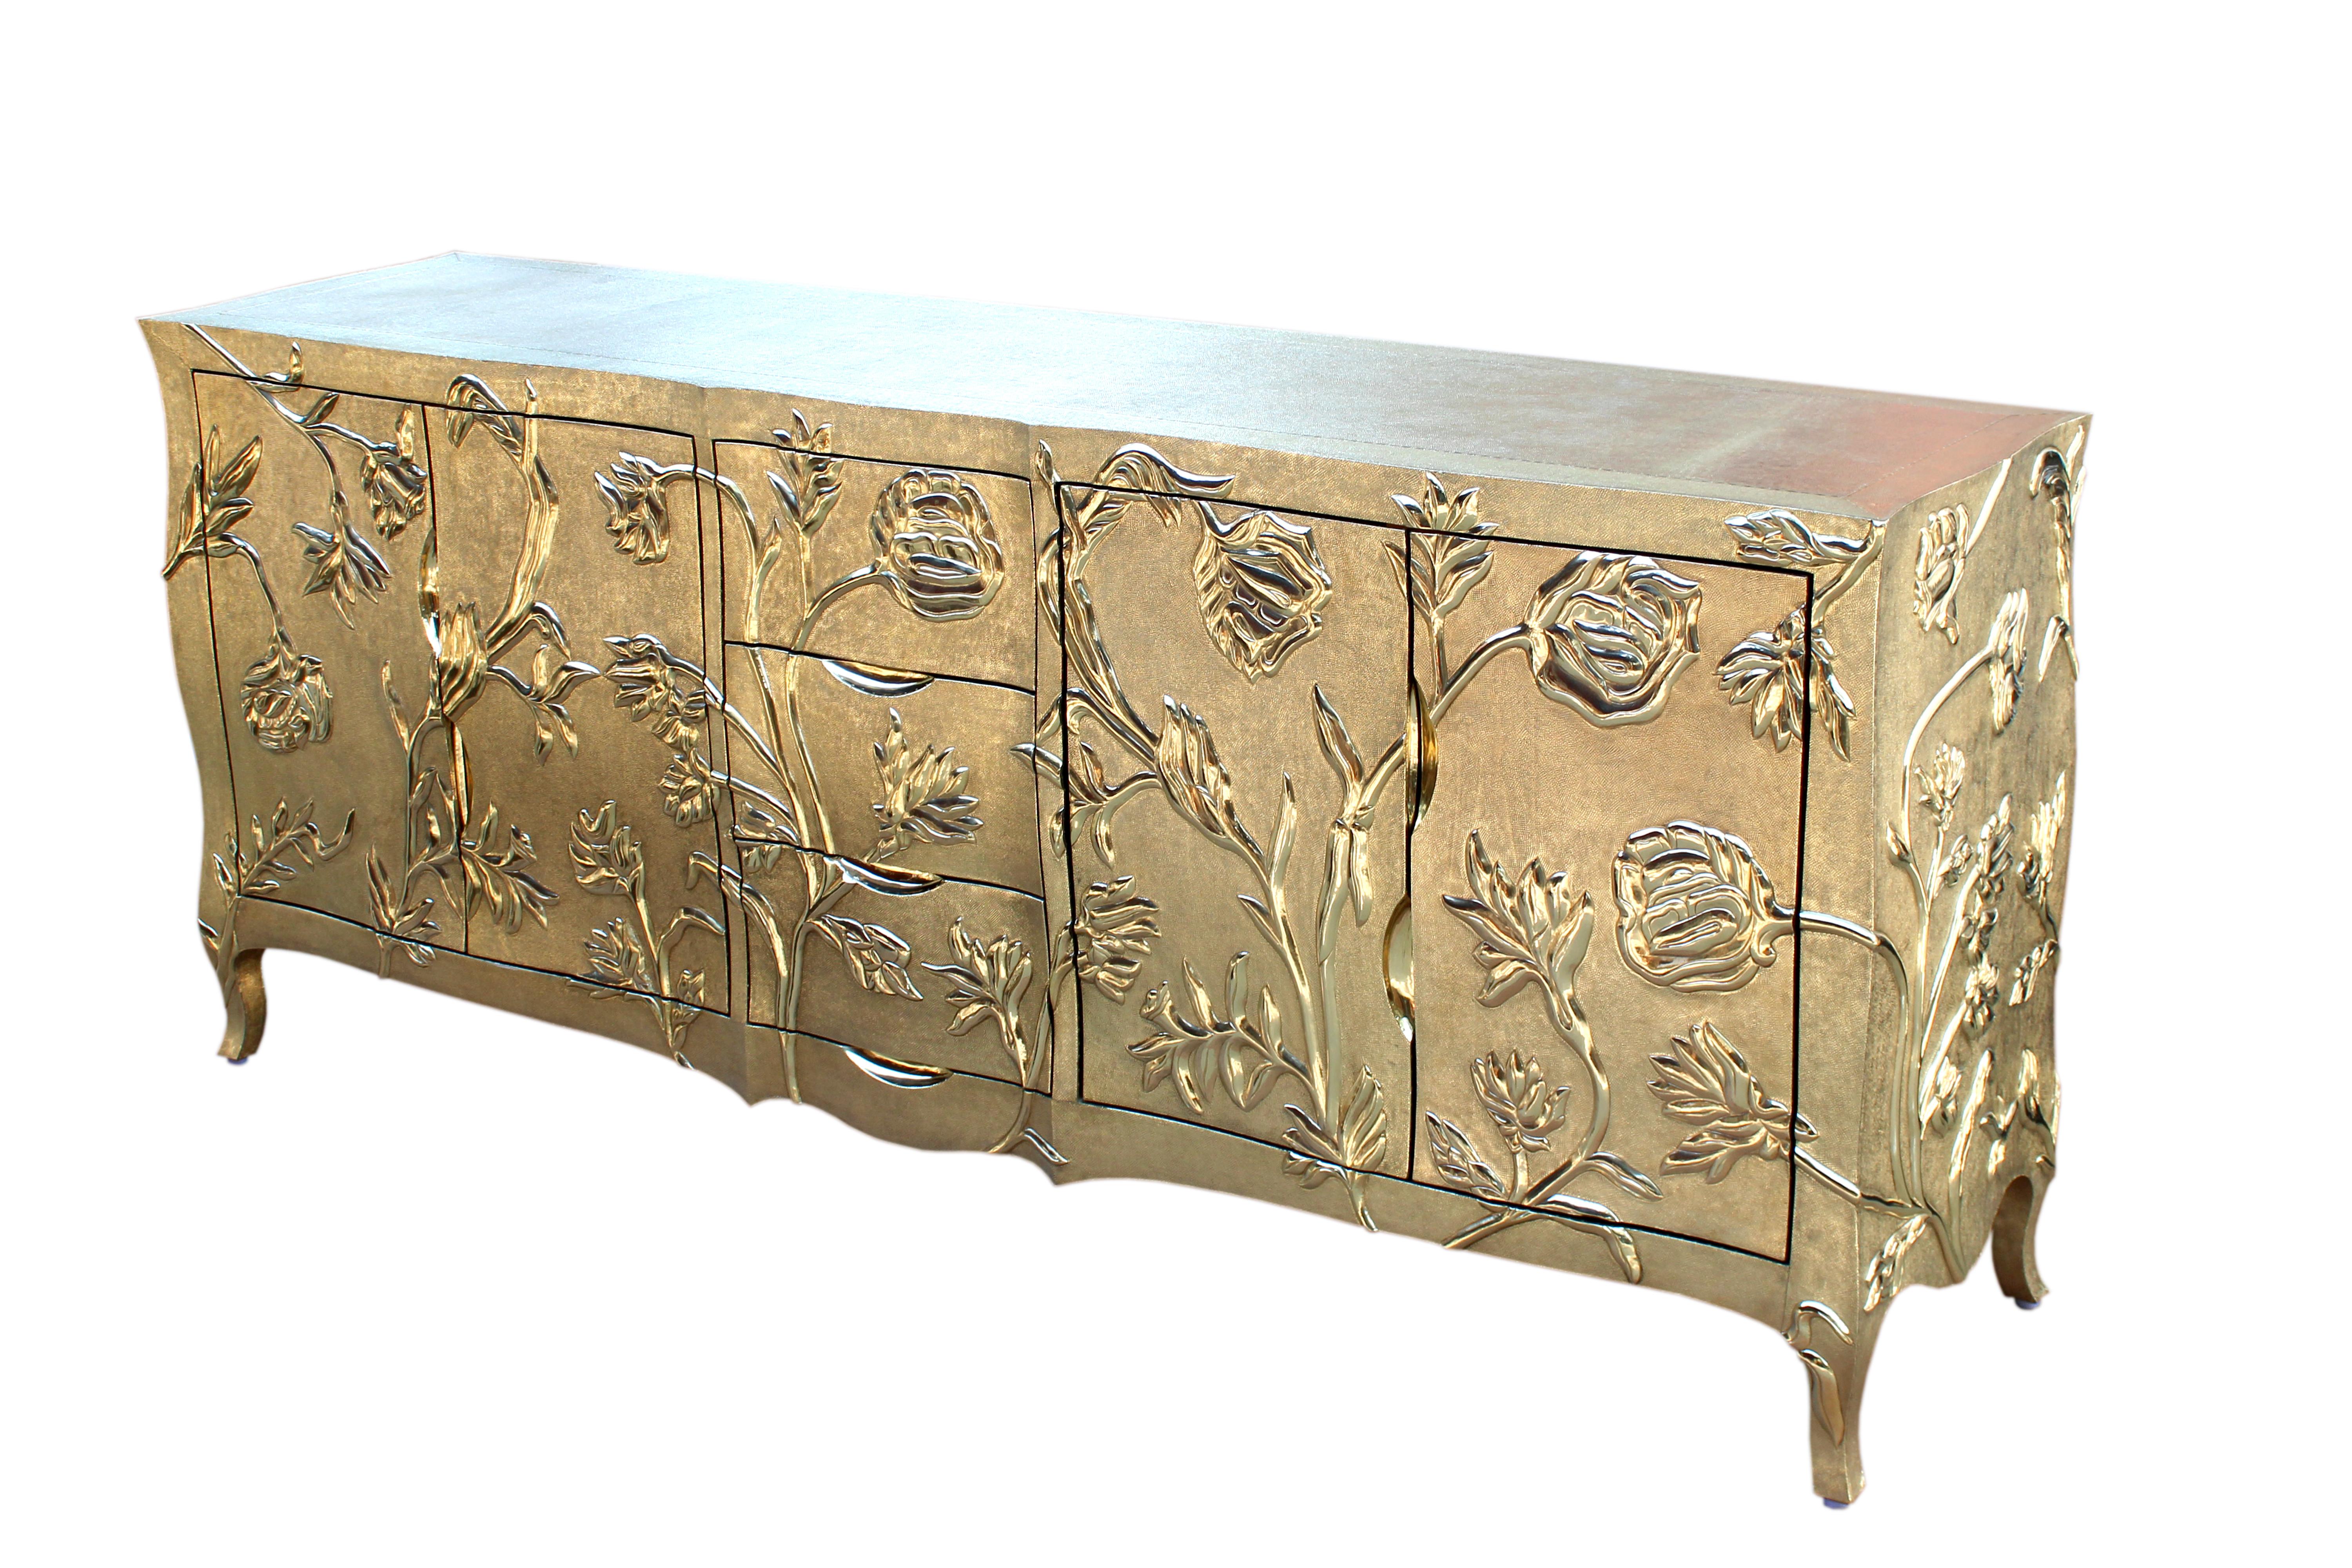 Metal Louise Floral Art Deco Buffet Fine Hammered Brass by Paul Mathieu For Sale